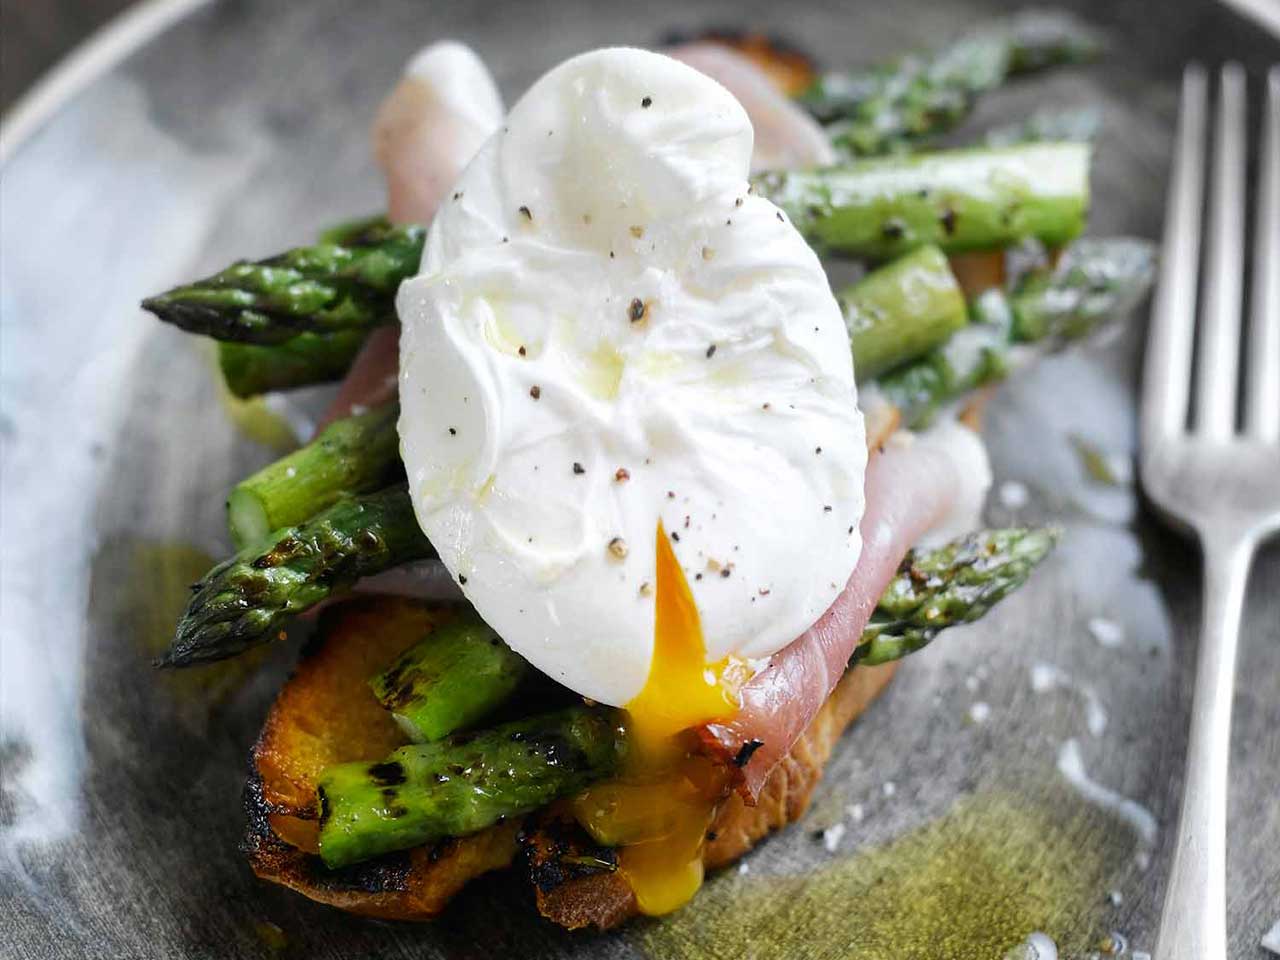 Toasted sourdough with grilled asparagus, Serrano ham and poached eggs 